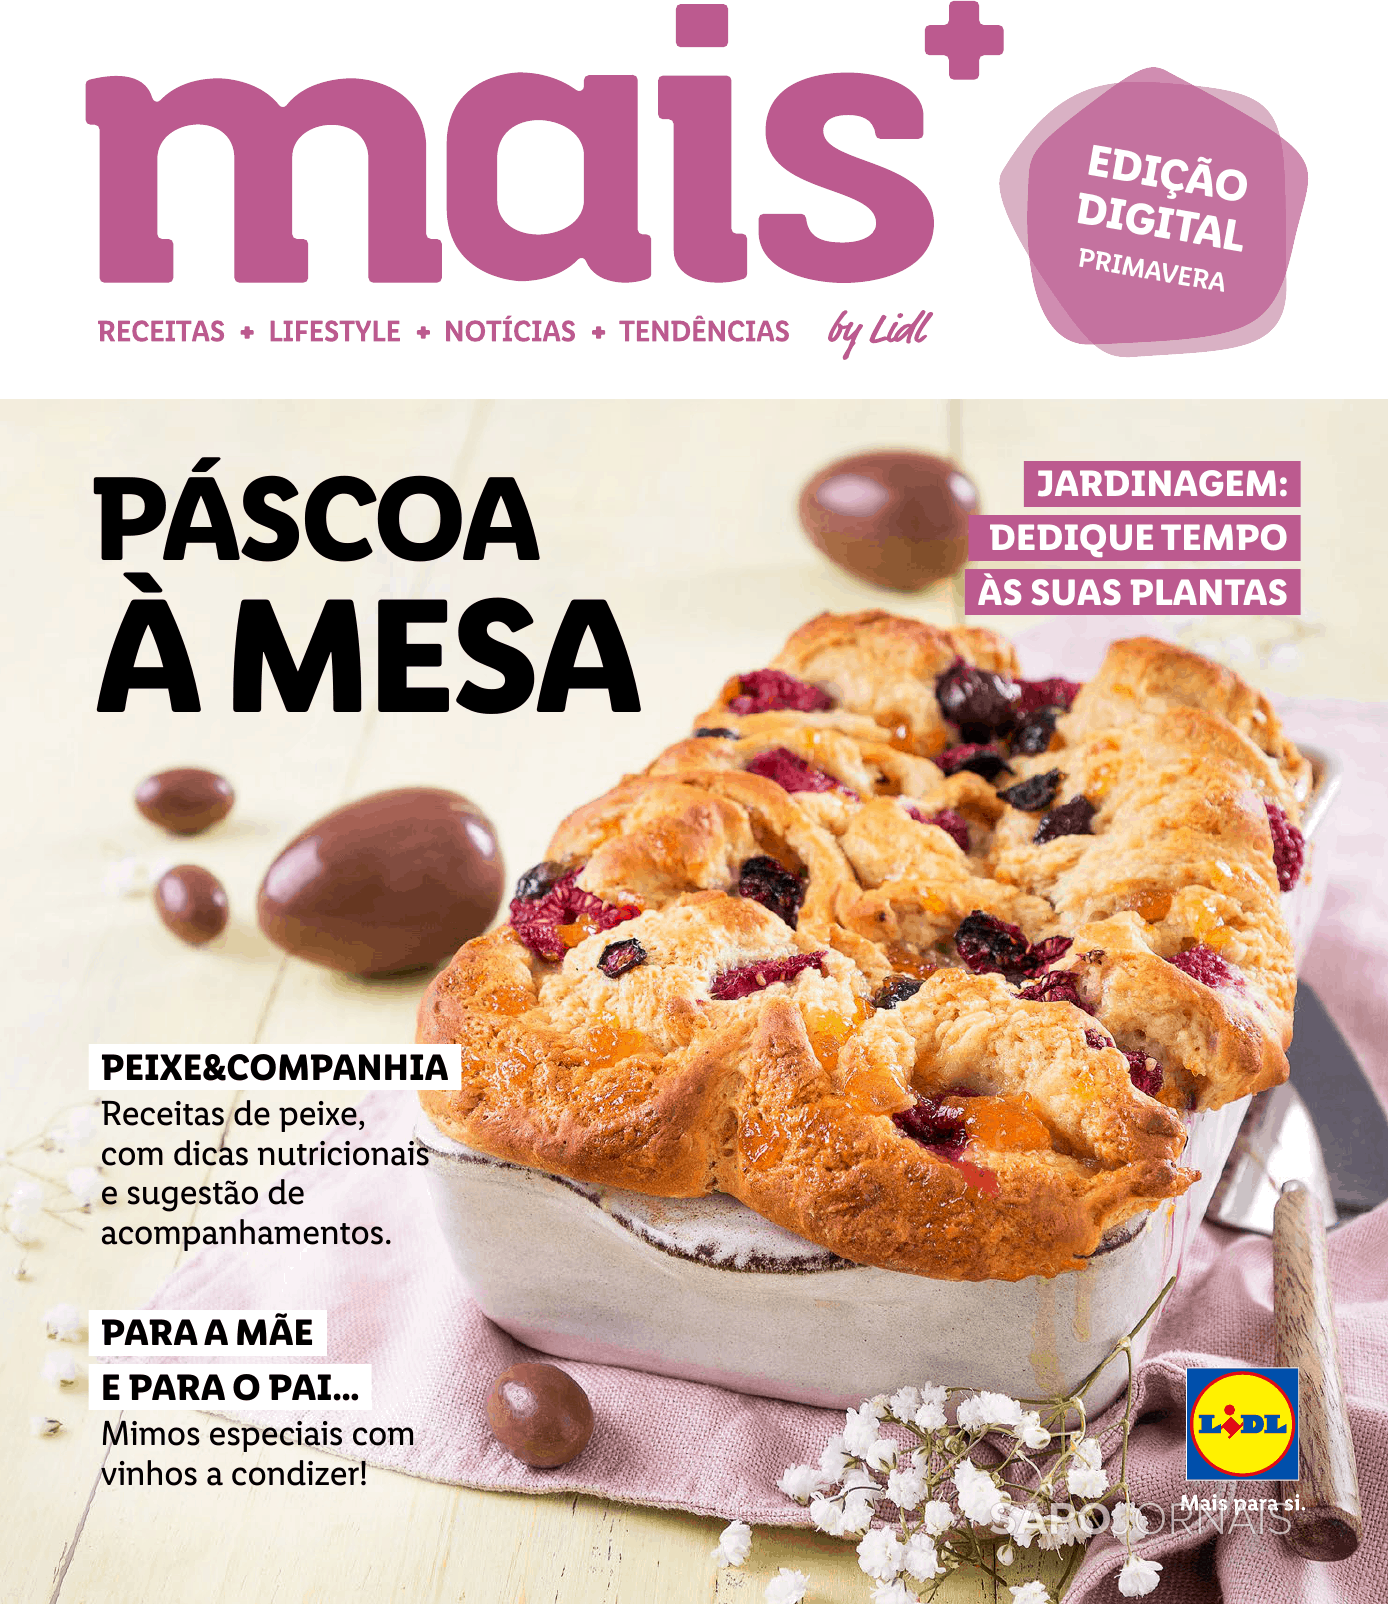 mais+ by Lidl